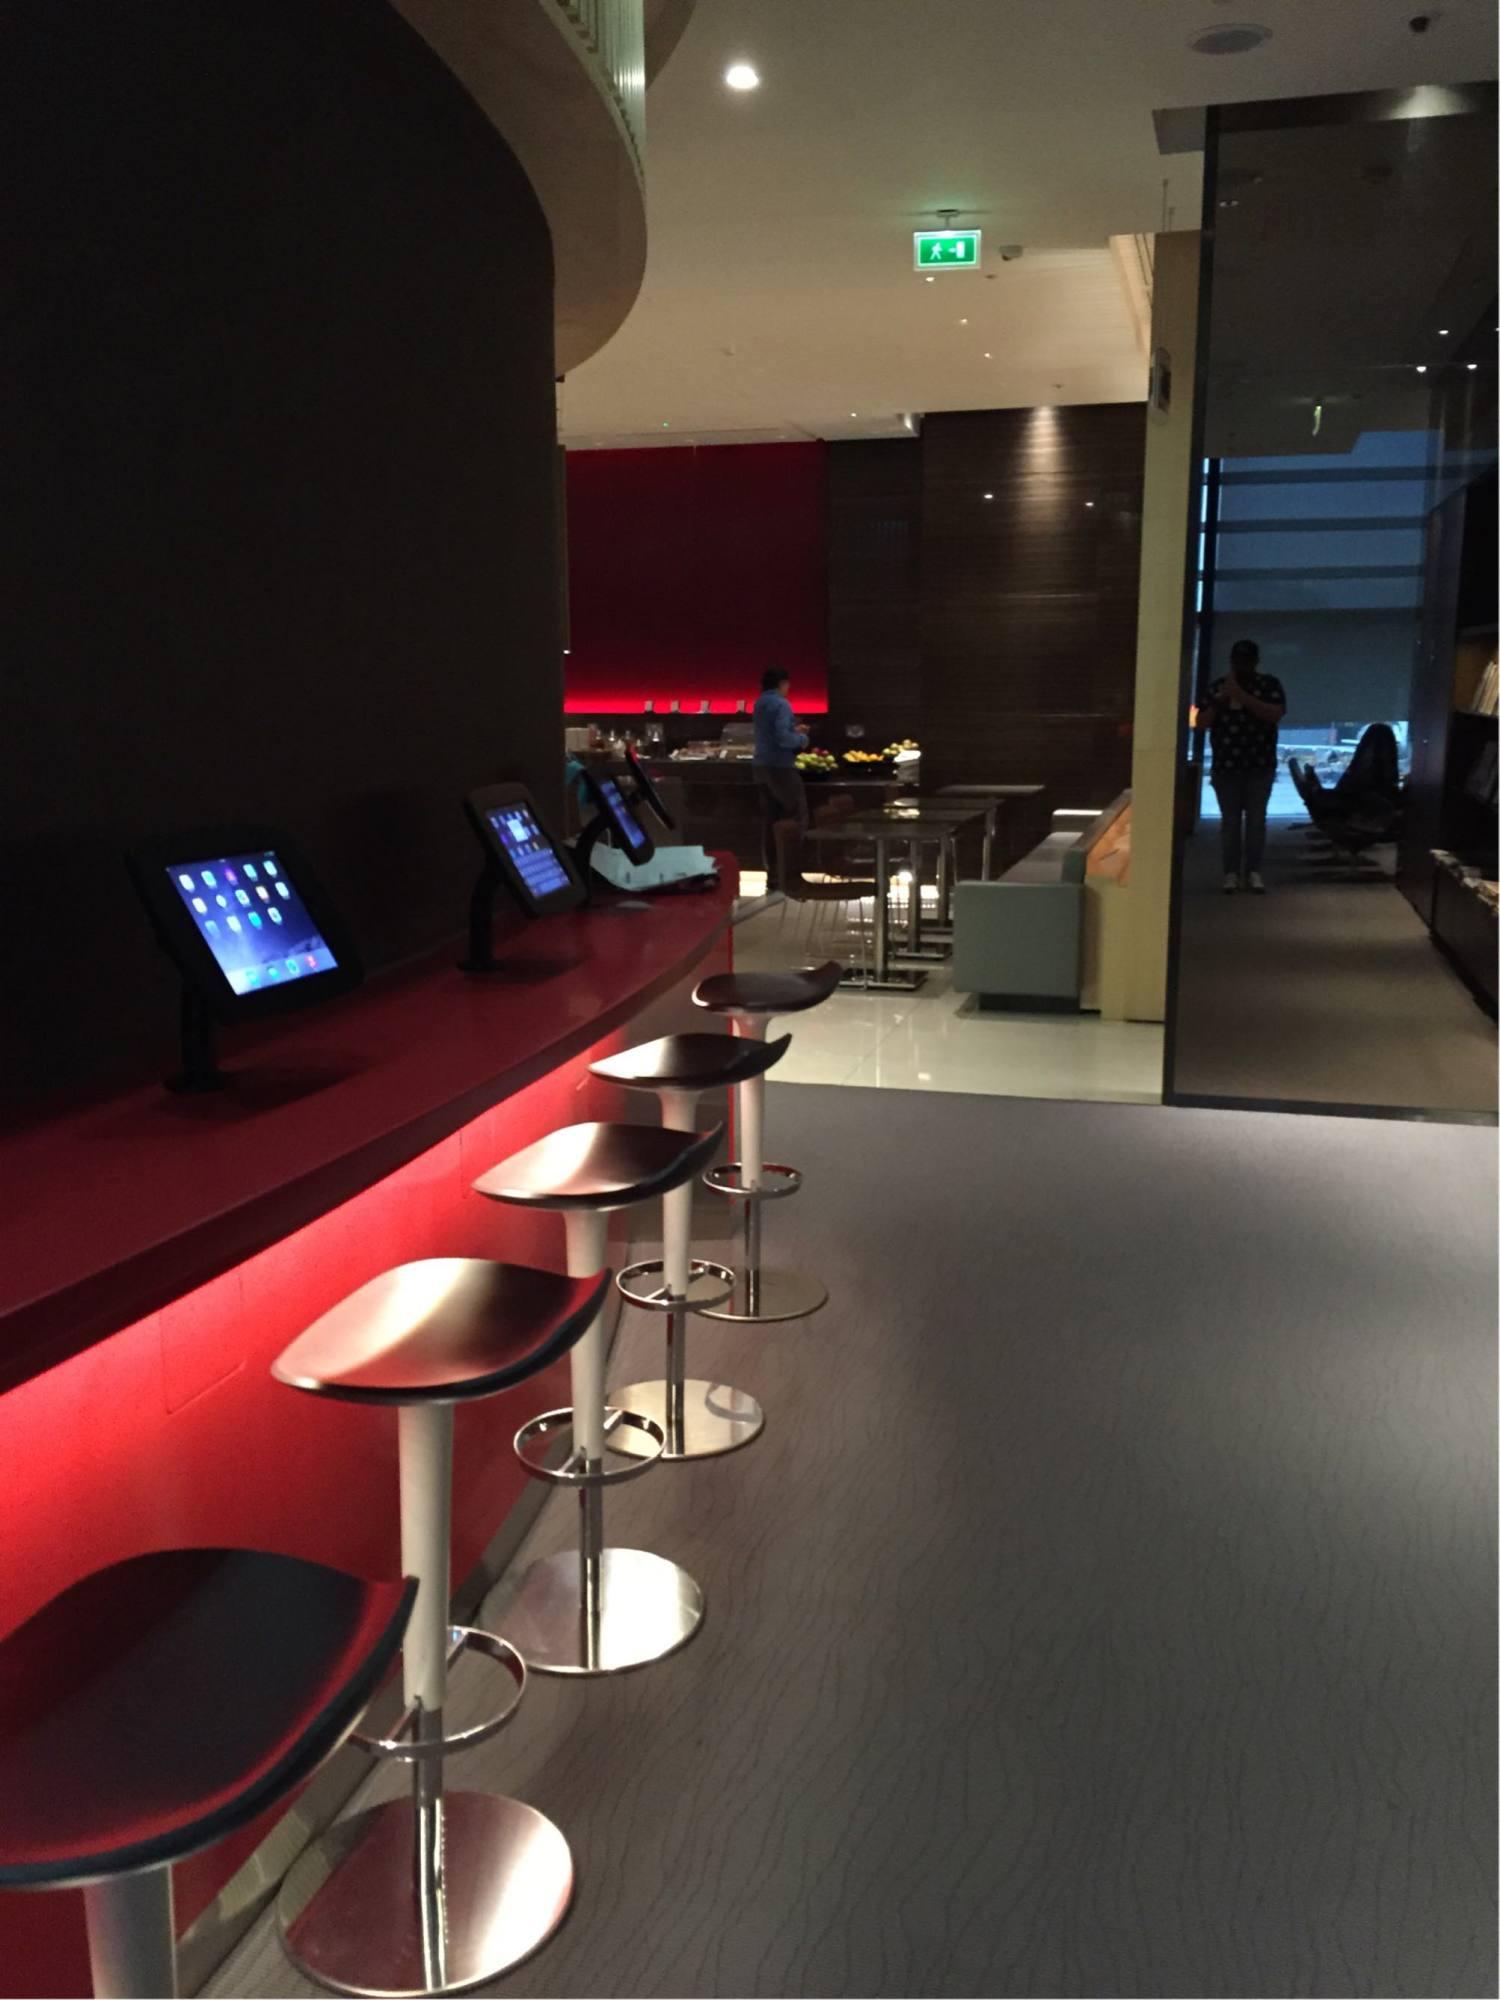 Air Canada Maple Leaf Lounge image 21 of 27